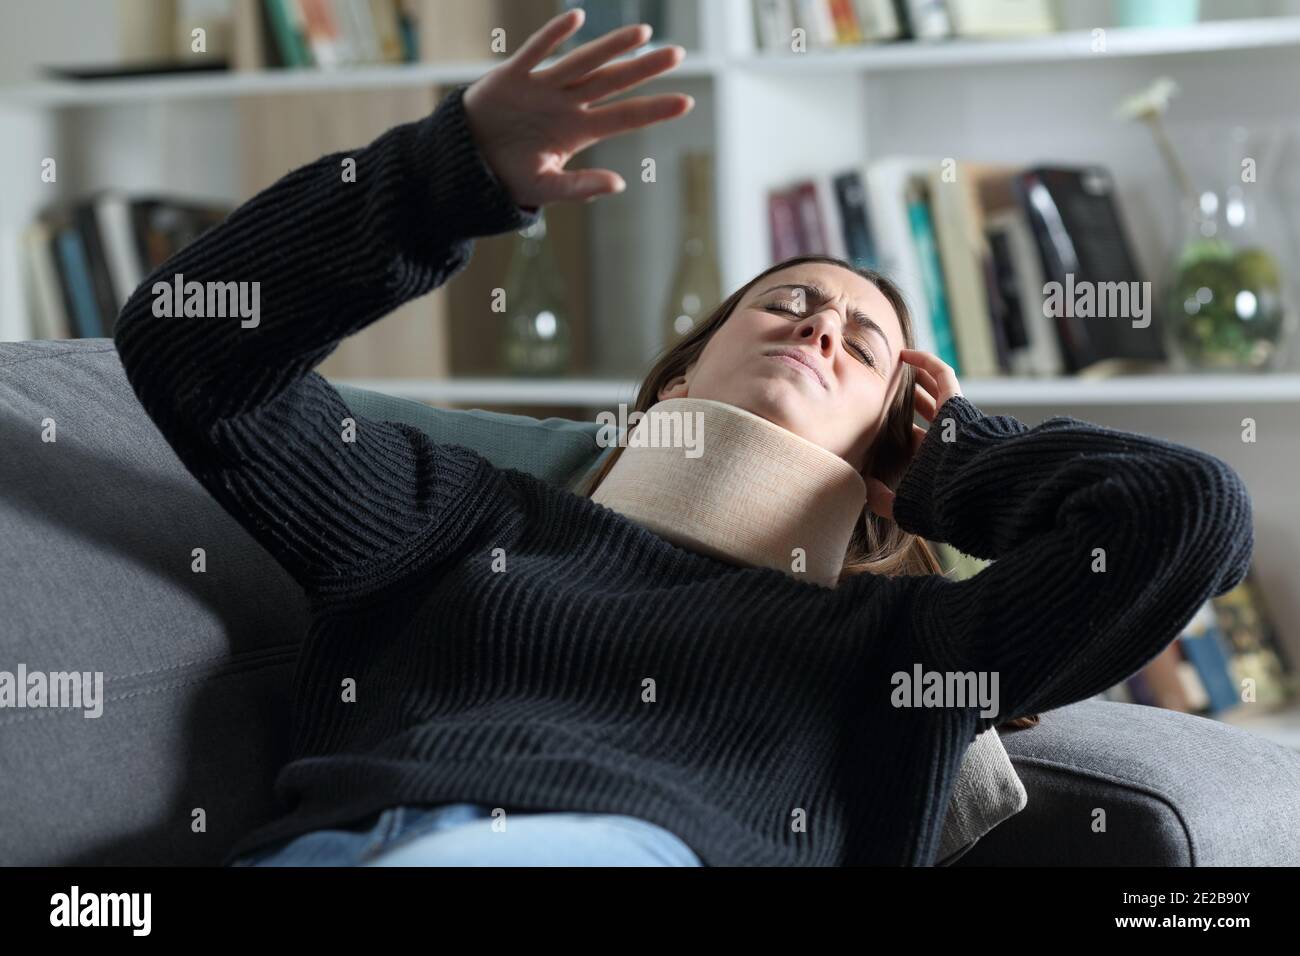 Dizzy disabled woman with neck brace suffering lying on a couch at home Stock Photo